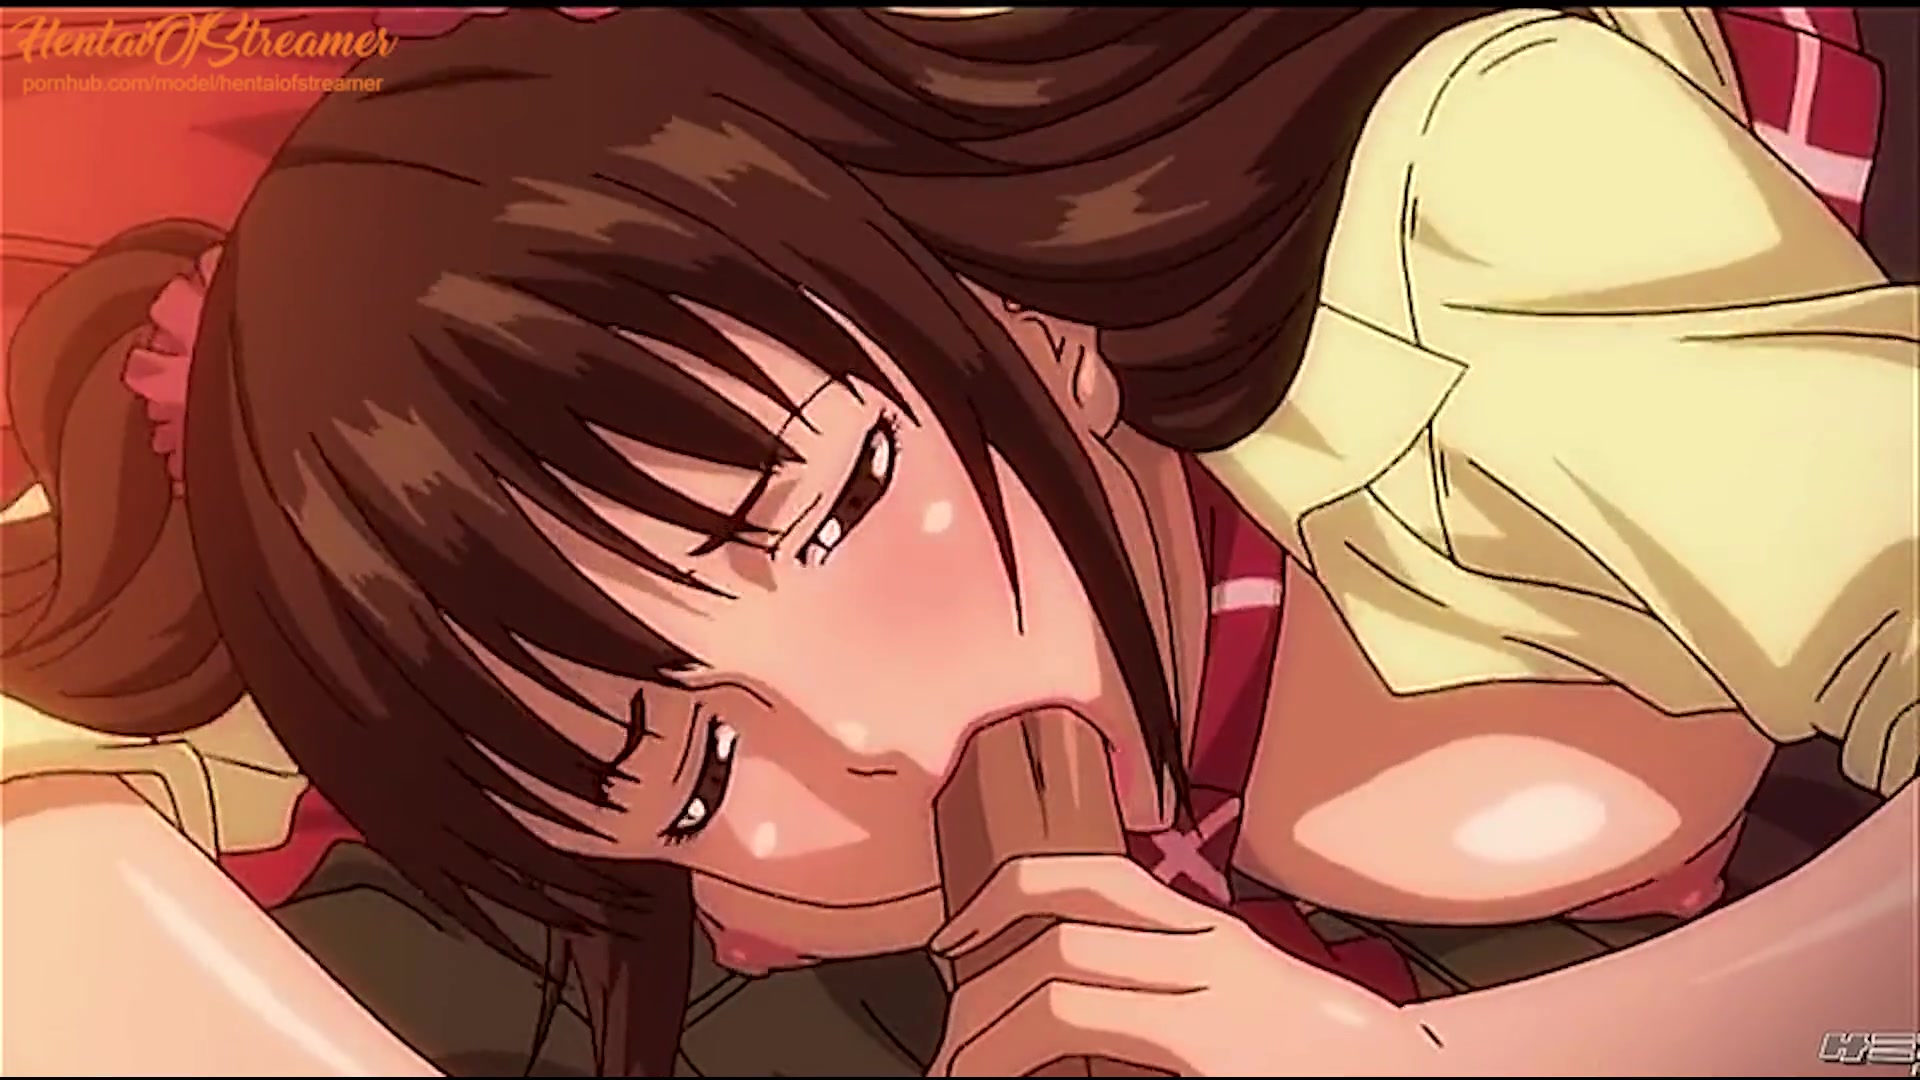 Anime Deepthroat Porn - Anime Porn Uncensored | Hotwife Dude Sees his Gf Plumb and Deep-Throat off  another Stud | Anime Porn, Anime - uiPorn.com